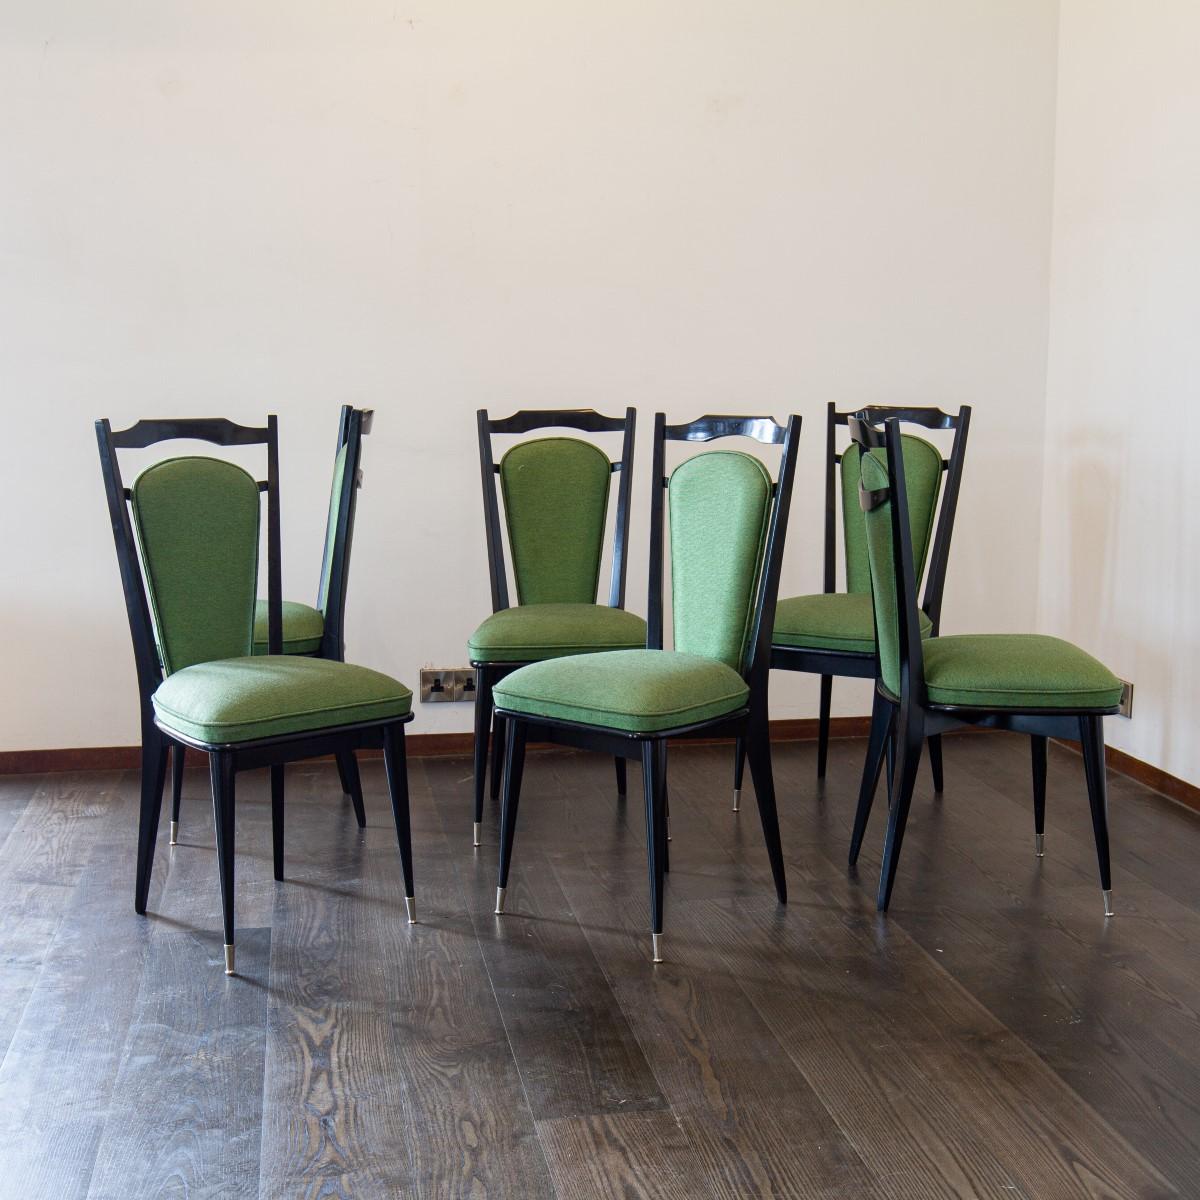 A set of six Italian, black framed dining chairs with nickel capped feet, upholstered in a vibrant green, 1950s.